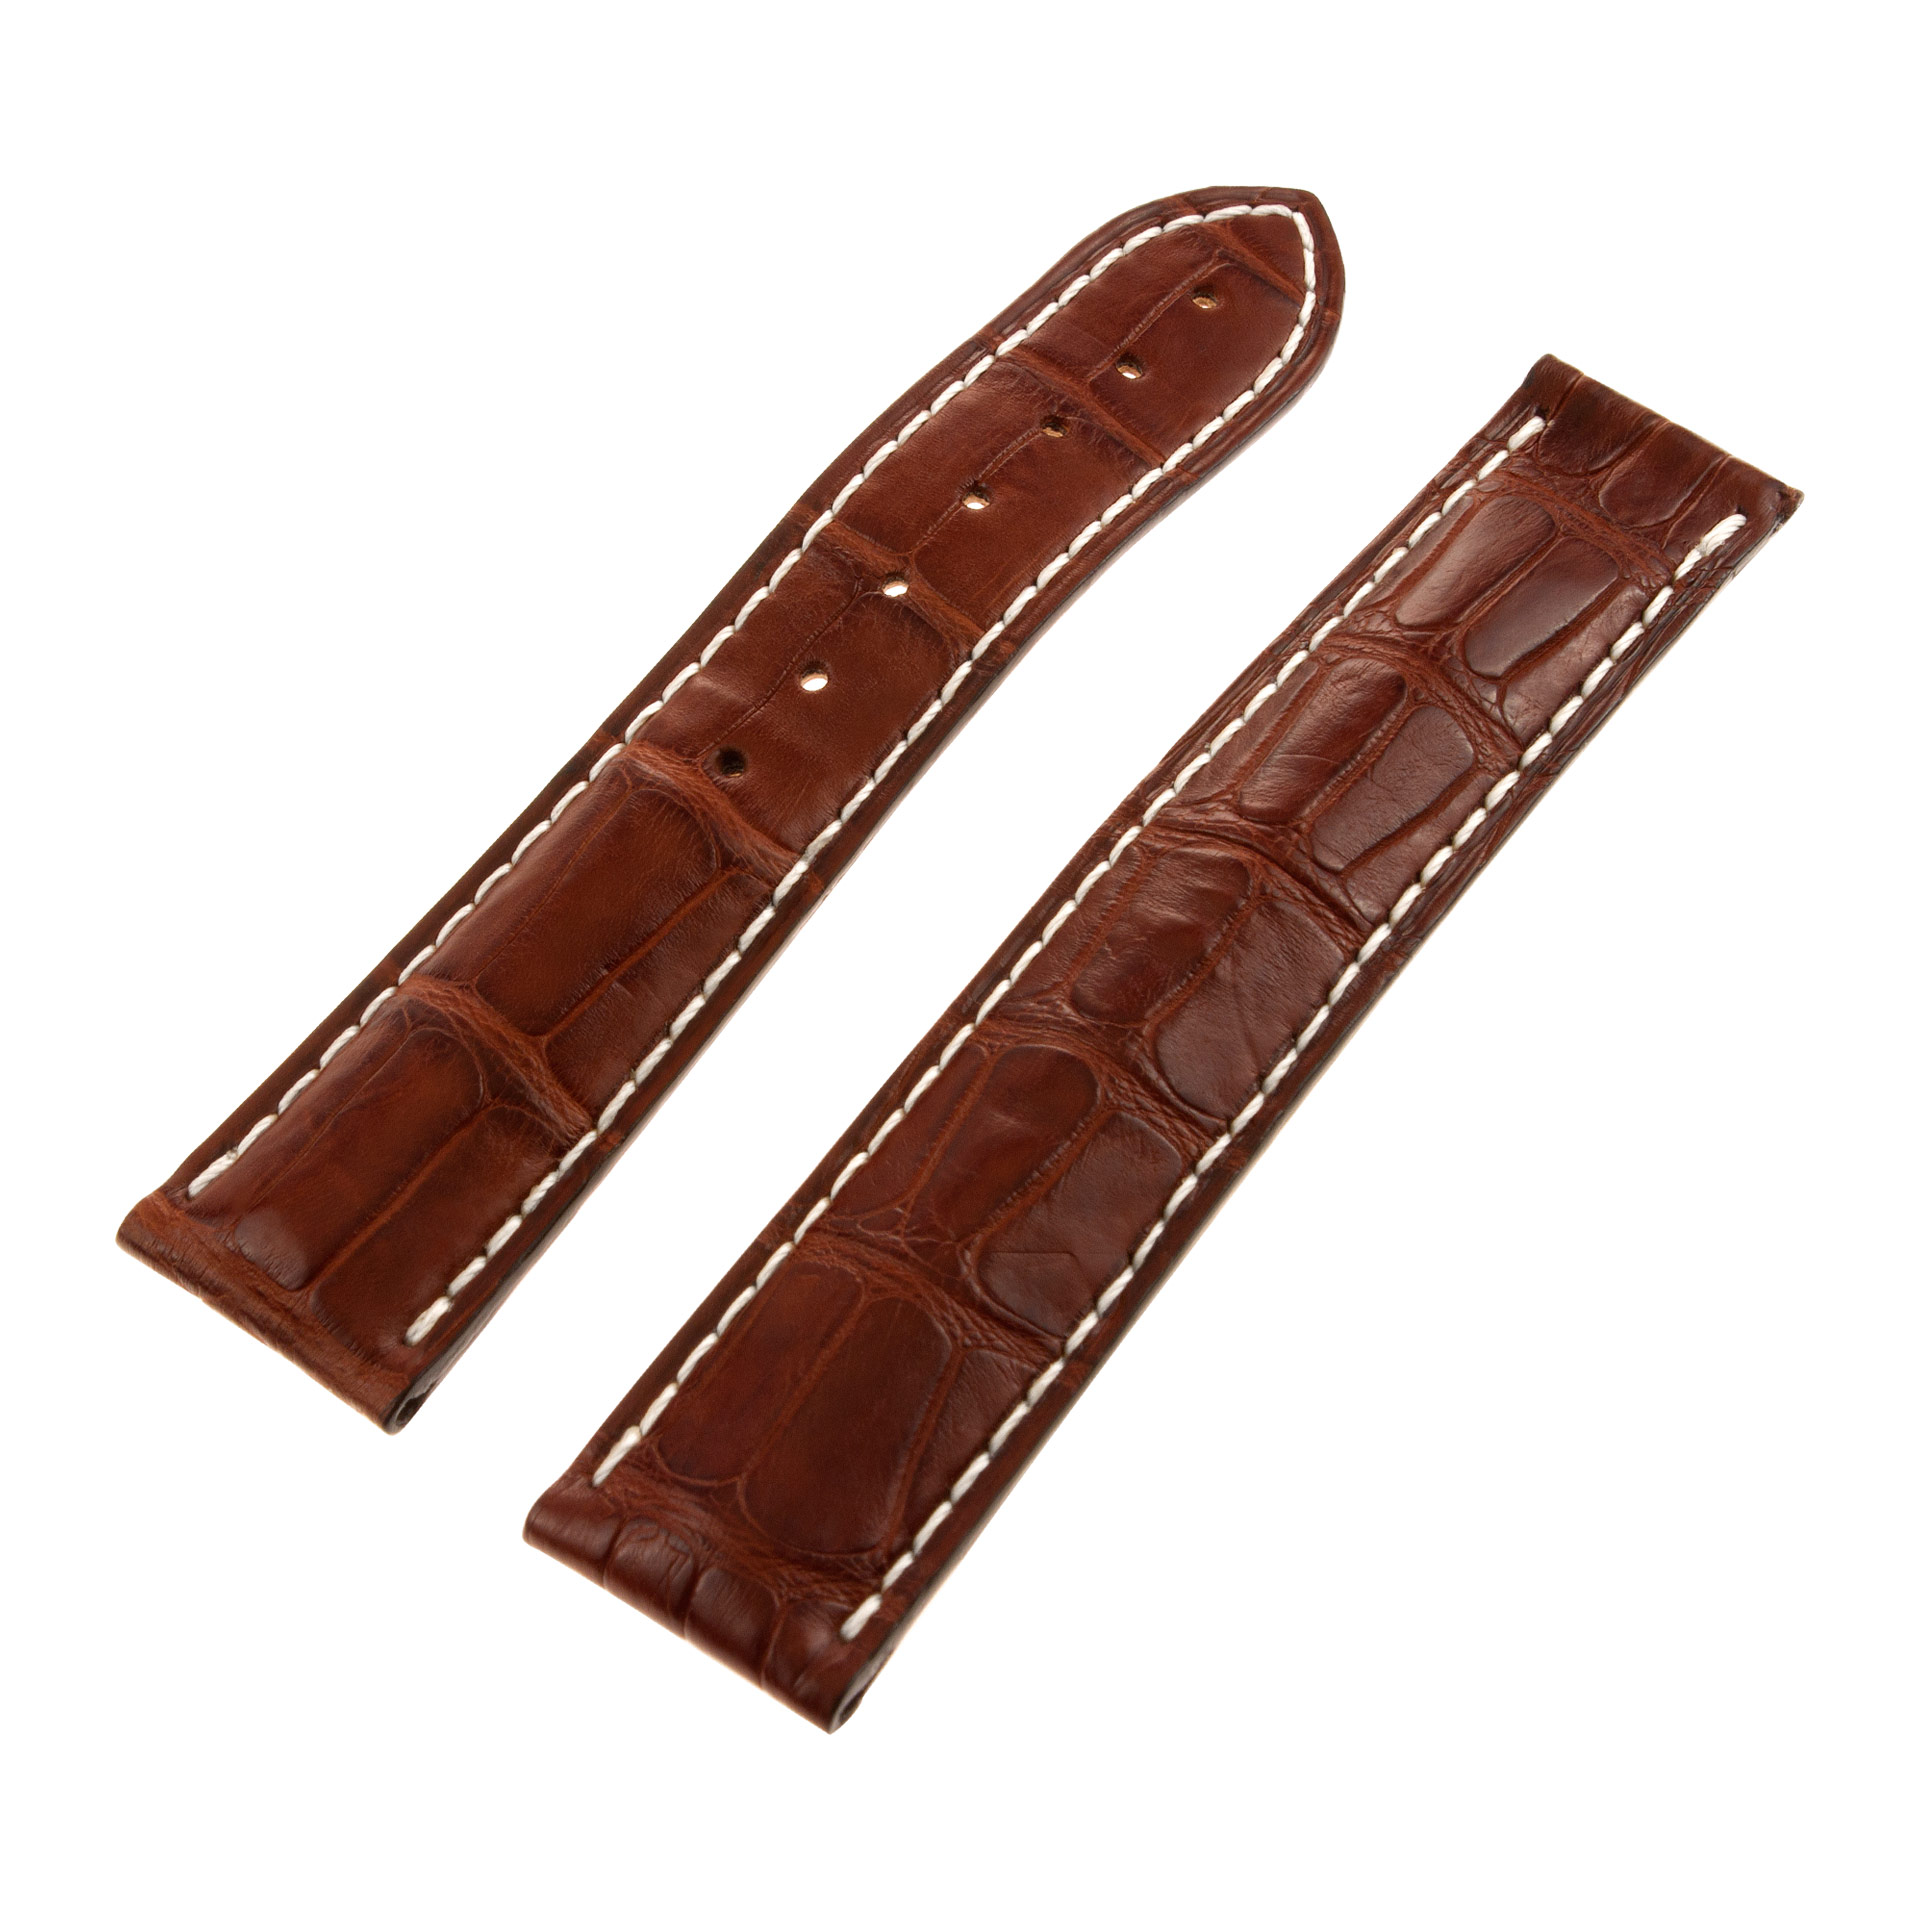 Omega brown alligator with white stitching for deployment buckle (98000079) (21 x 18) image 1